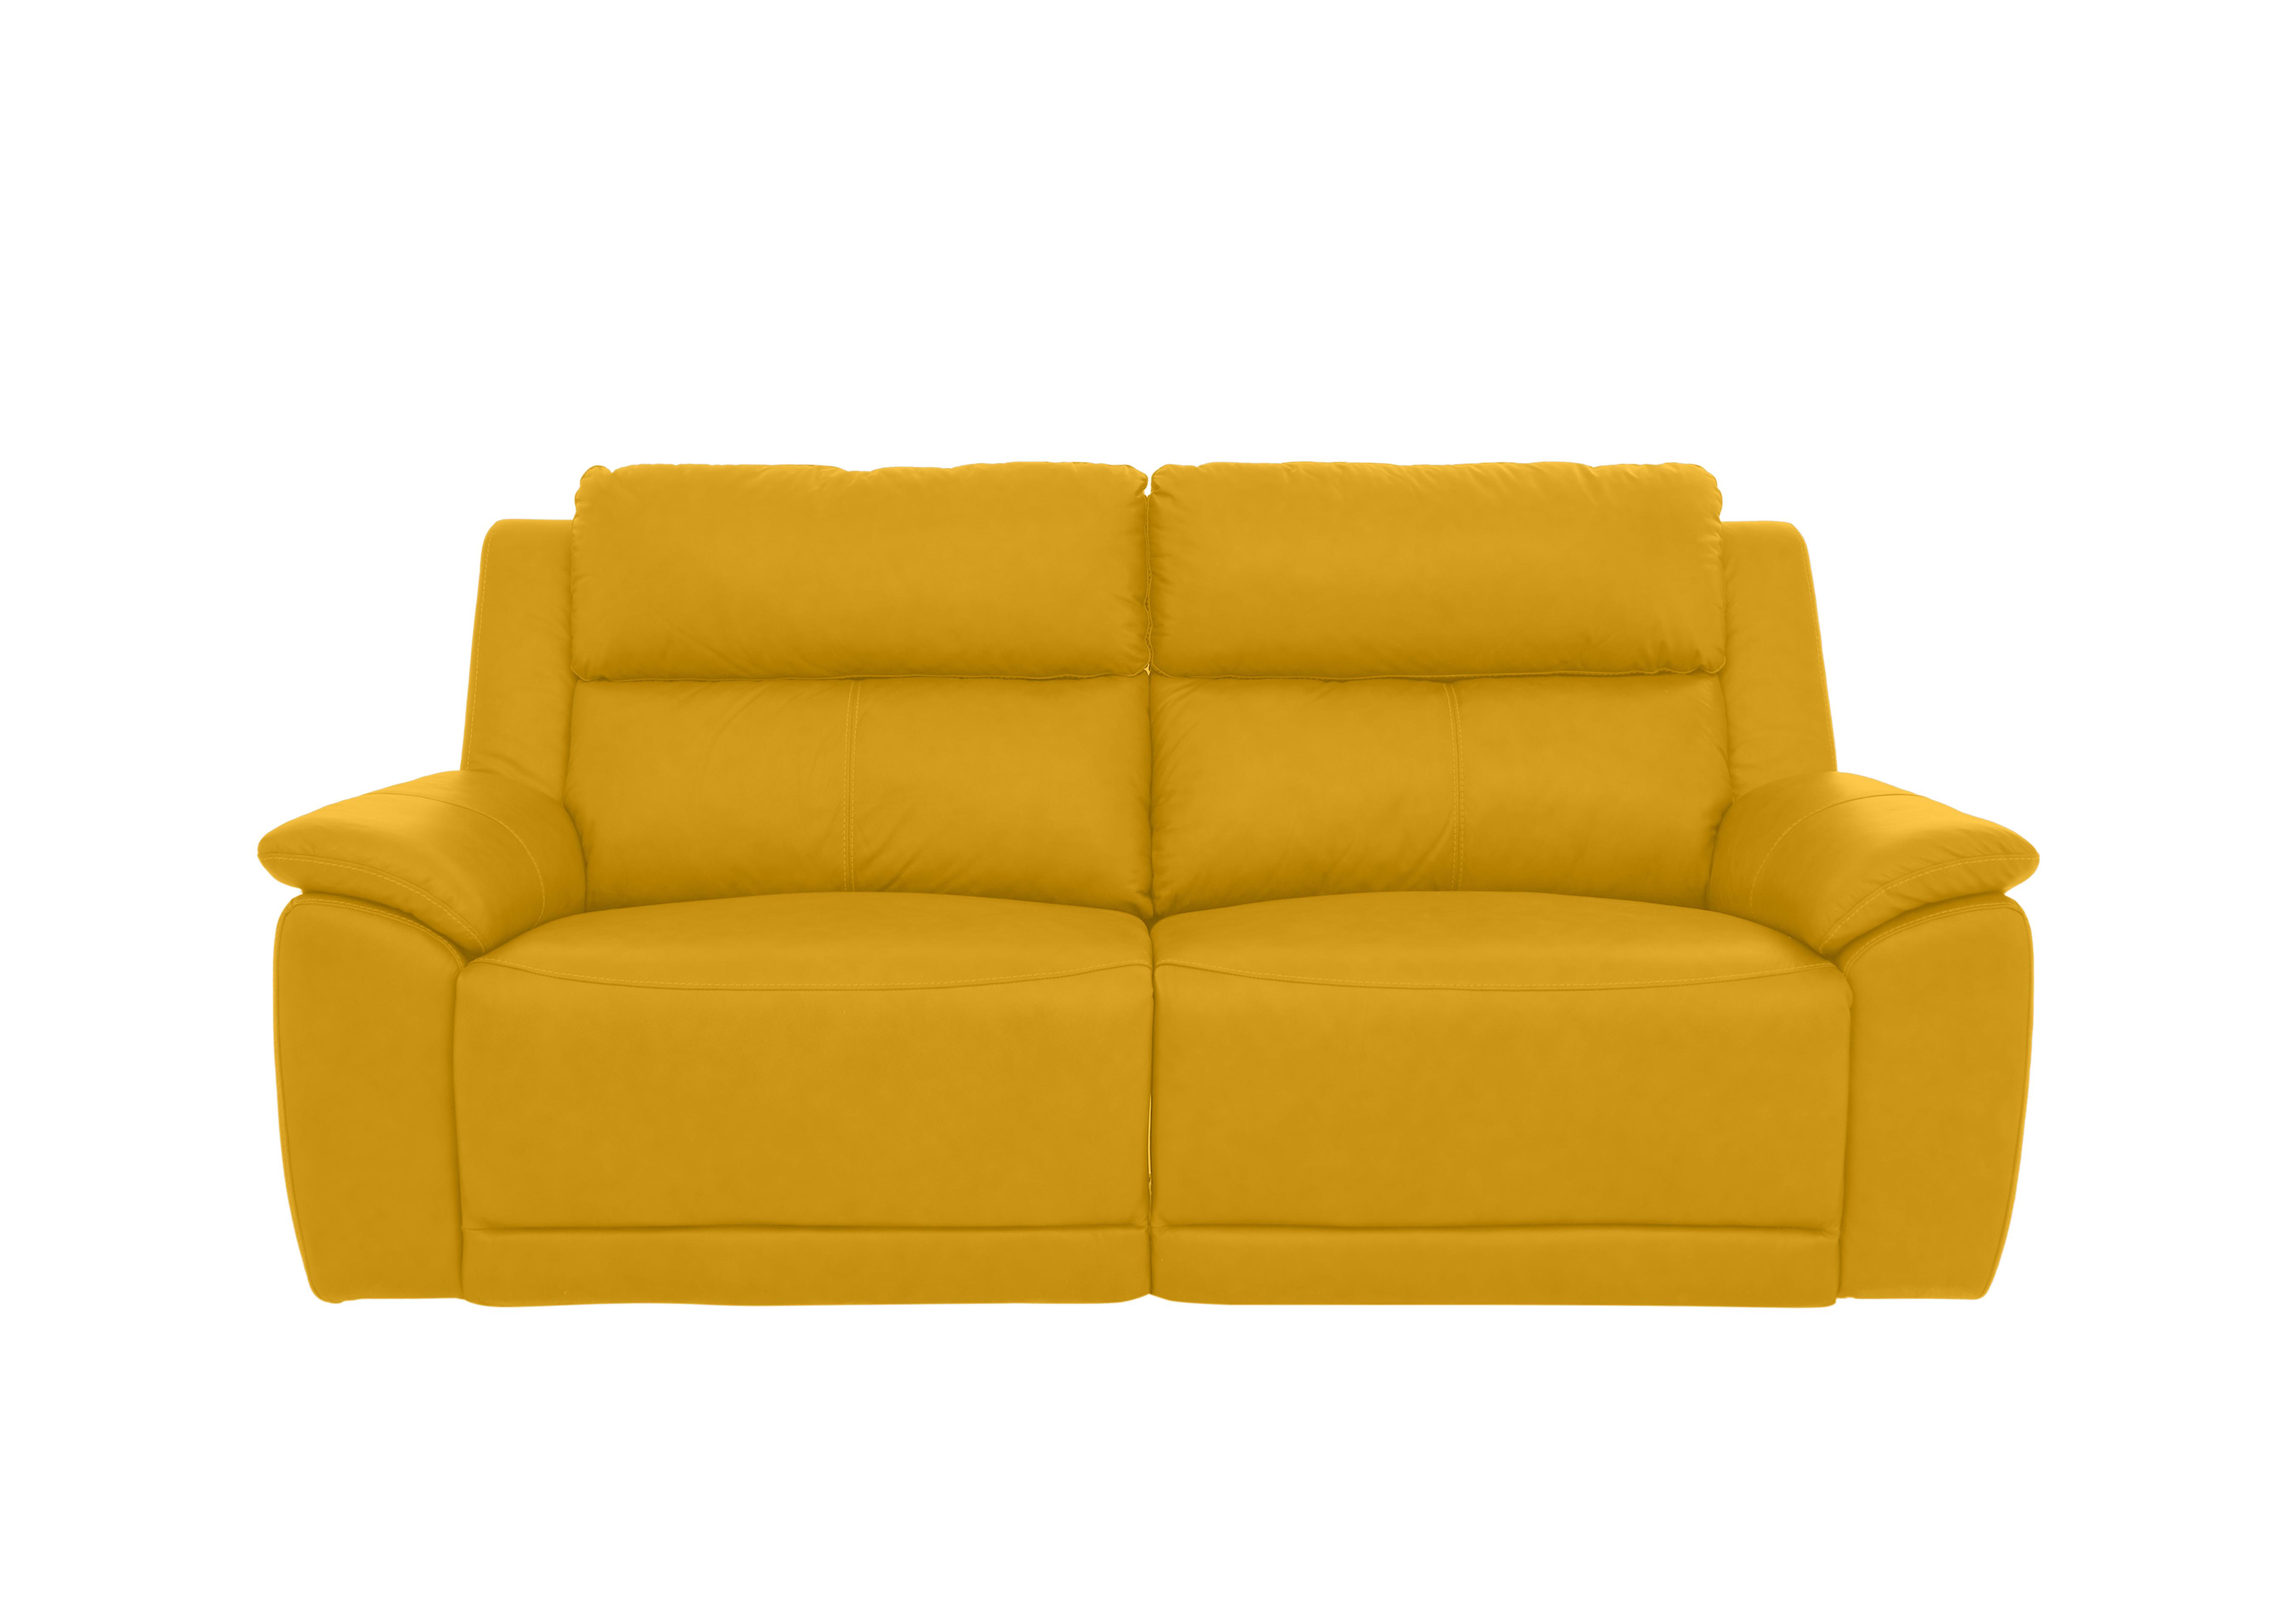 Utah 3 Seater Leather Power Recliner Sofa with Power Headrests and Power Lumbar in Giallo Le-9310 on Furniture Village